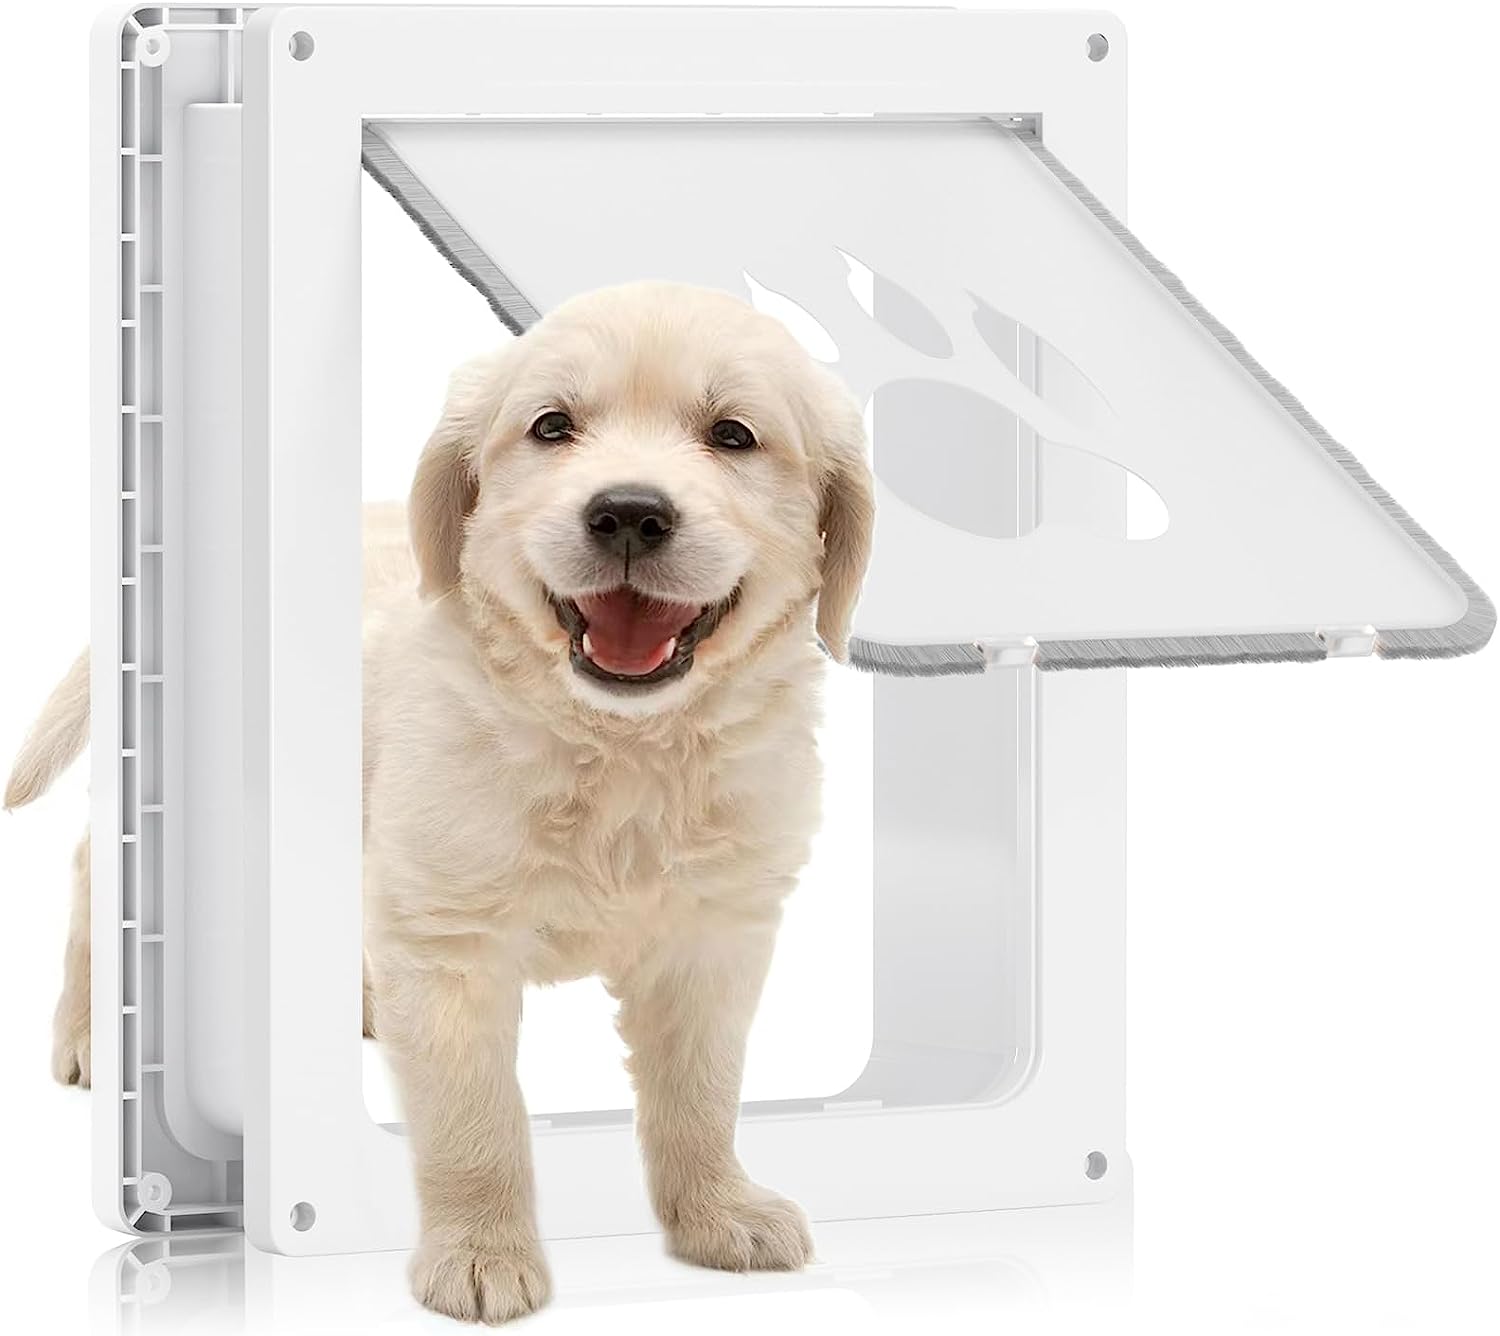 MIAOTONG Dog Doors for Medium Dogs and Cats, Upgrade [...]